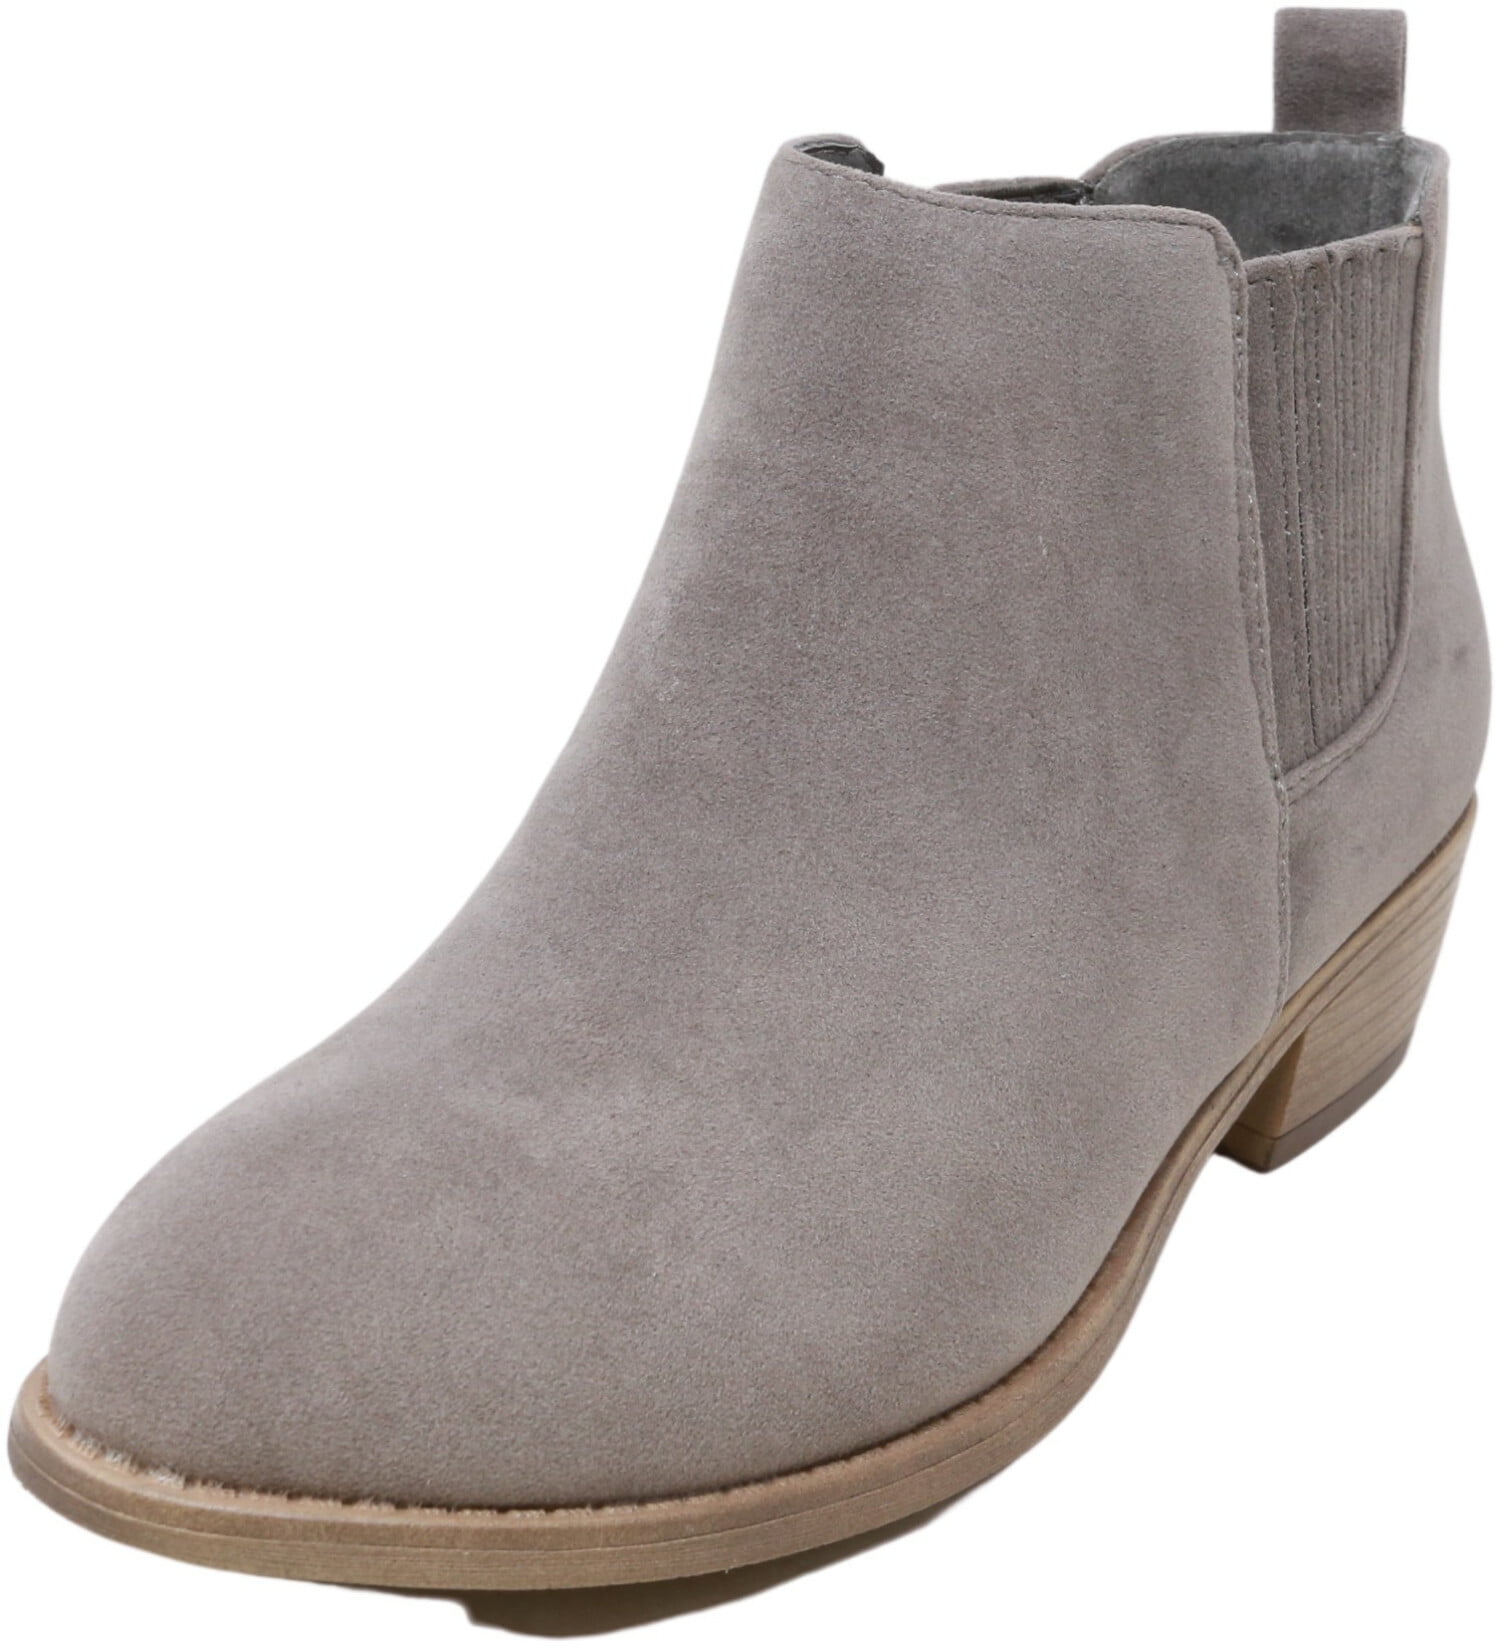 Brinley Co Womens RIZZ Ankle Boot